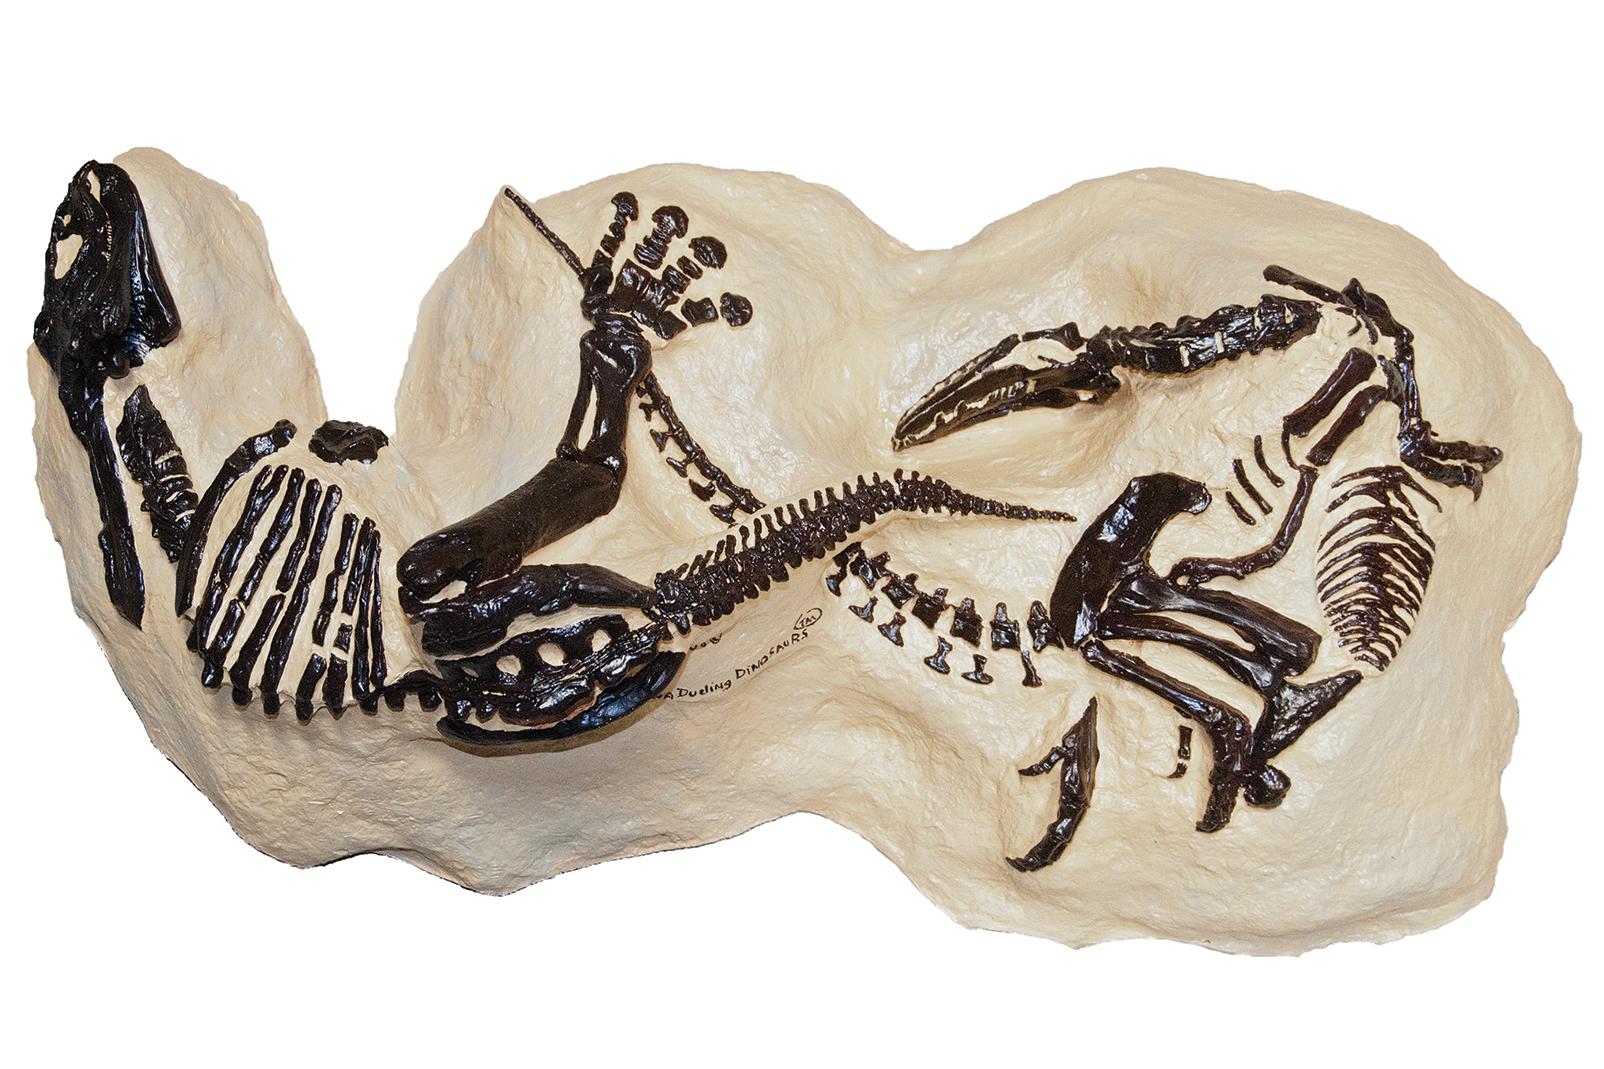 A Fossil Shows Dinosaurs Permanently Locked In A Fight